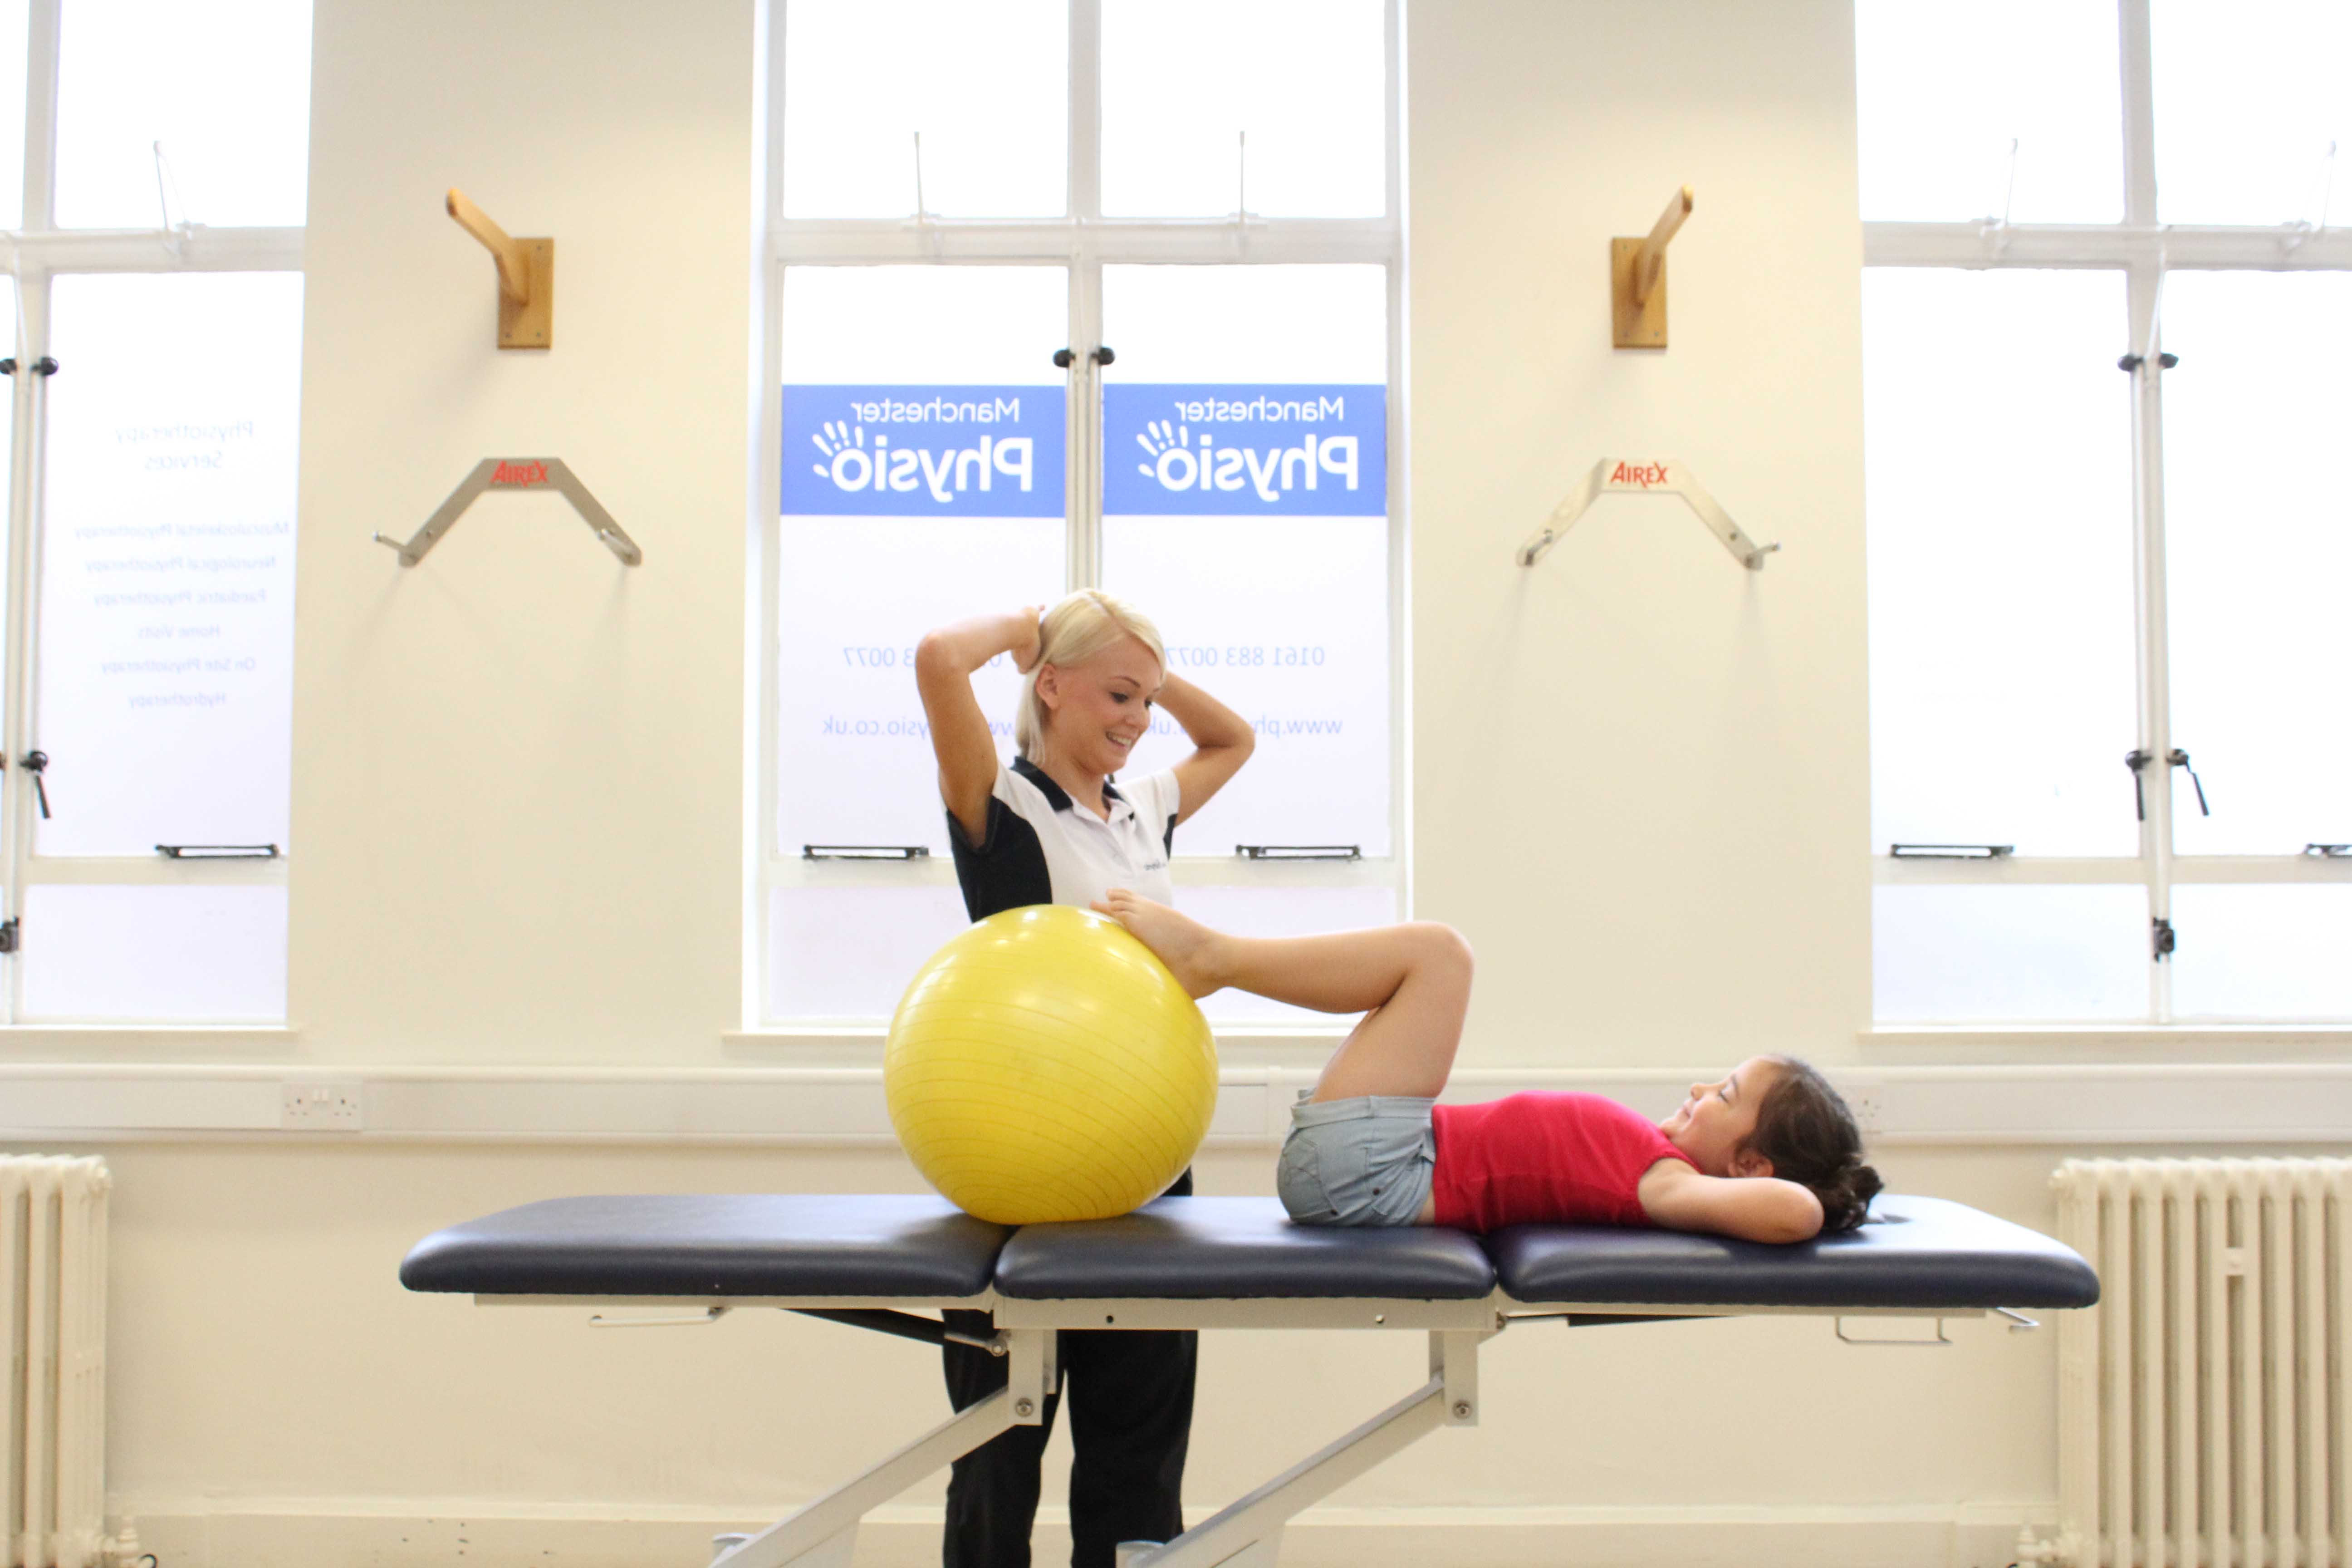 Specialist physiotherapist supervising lower limb stretching exercises using a gym ball